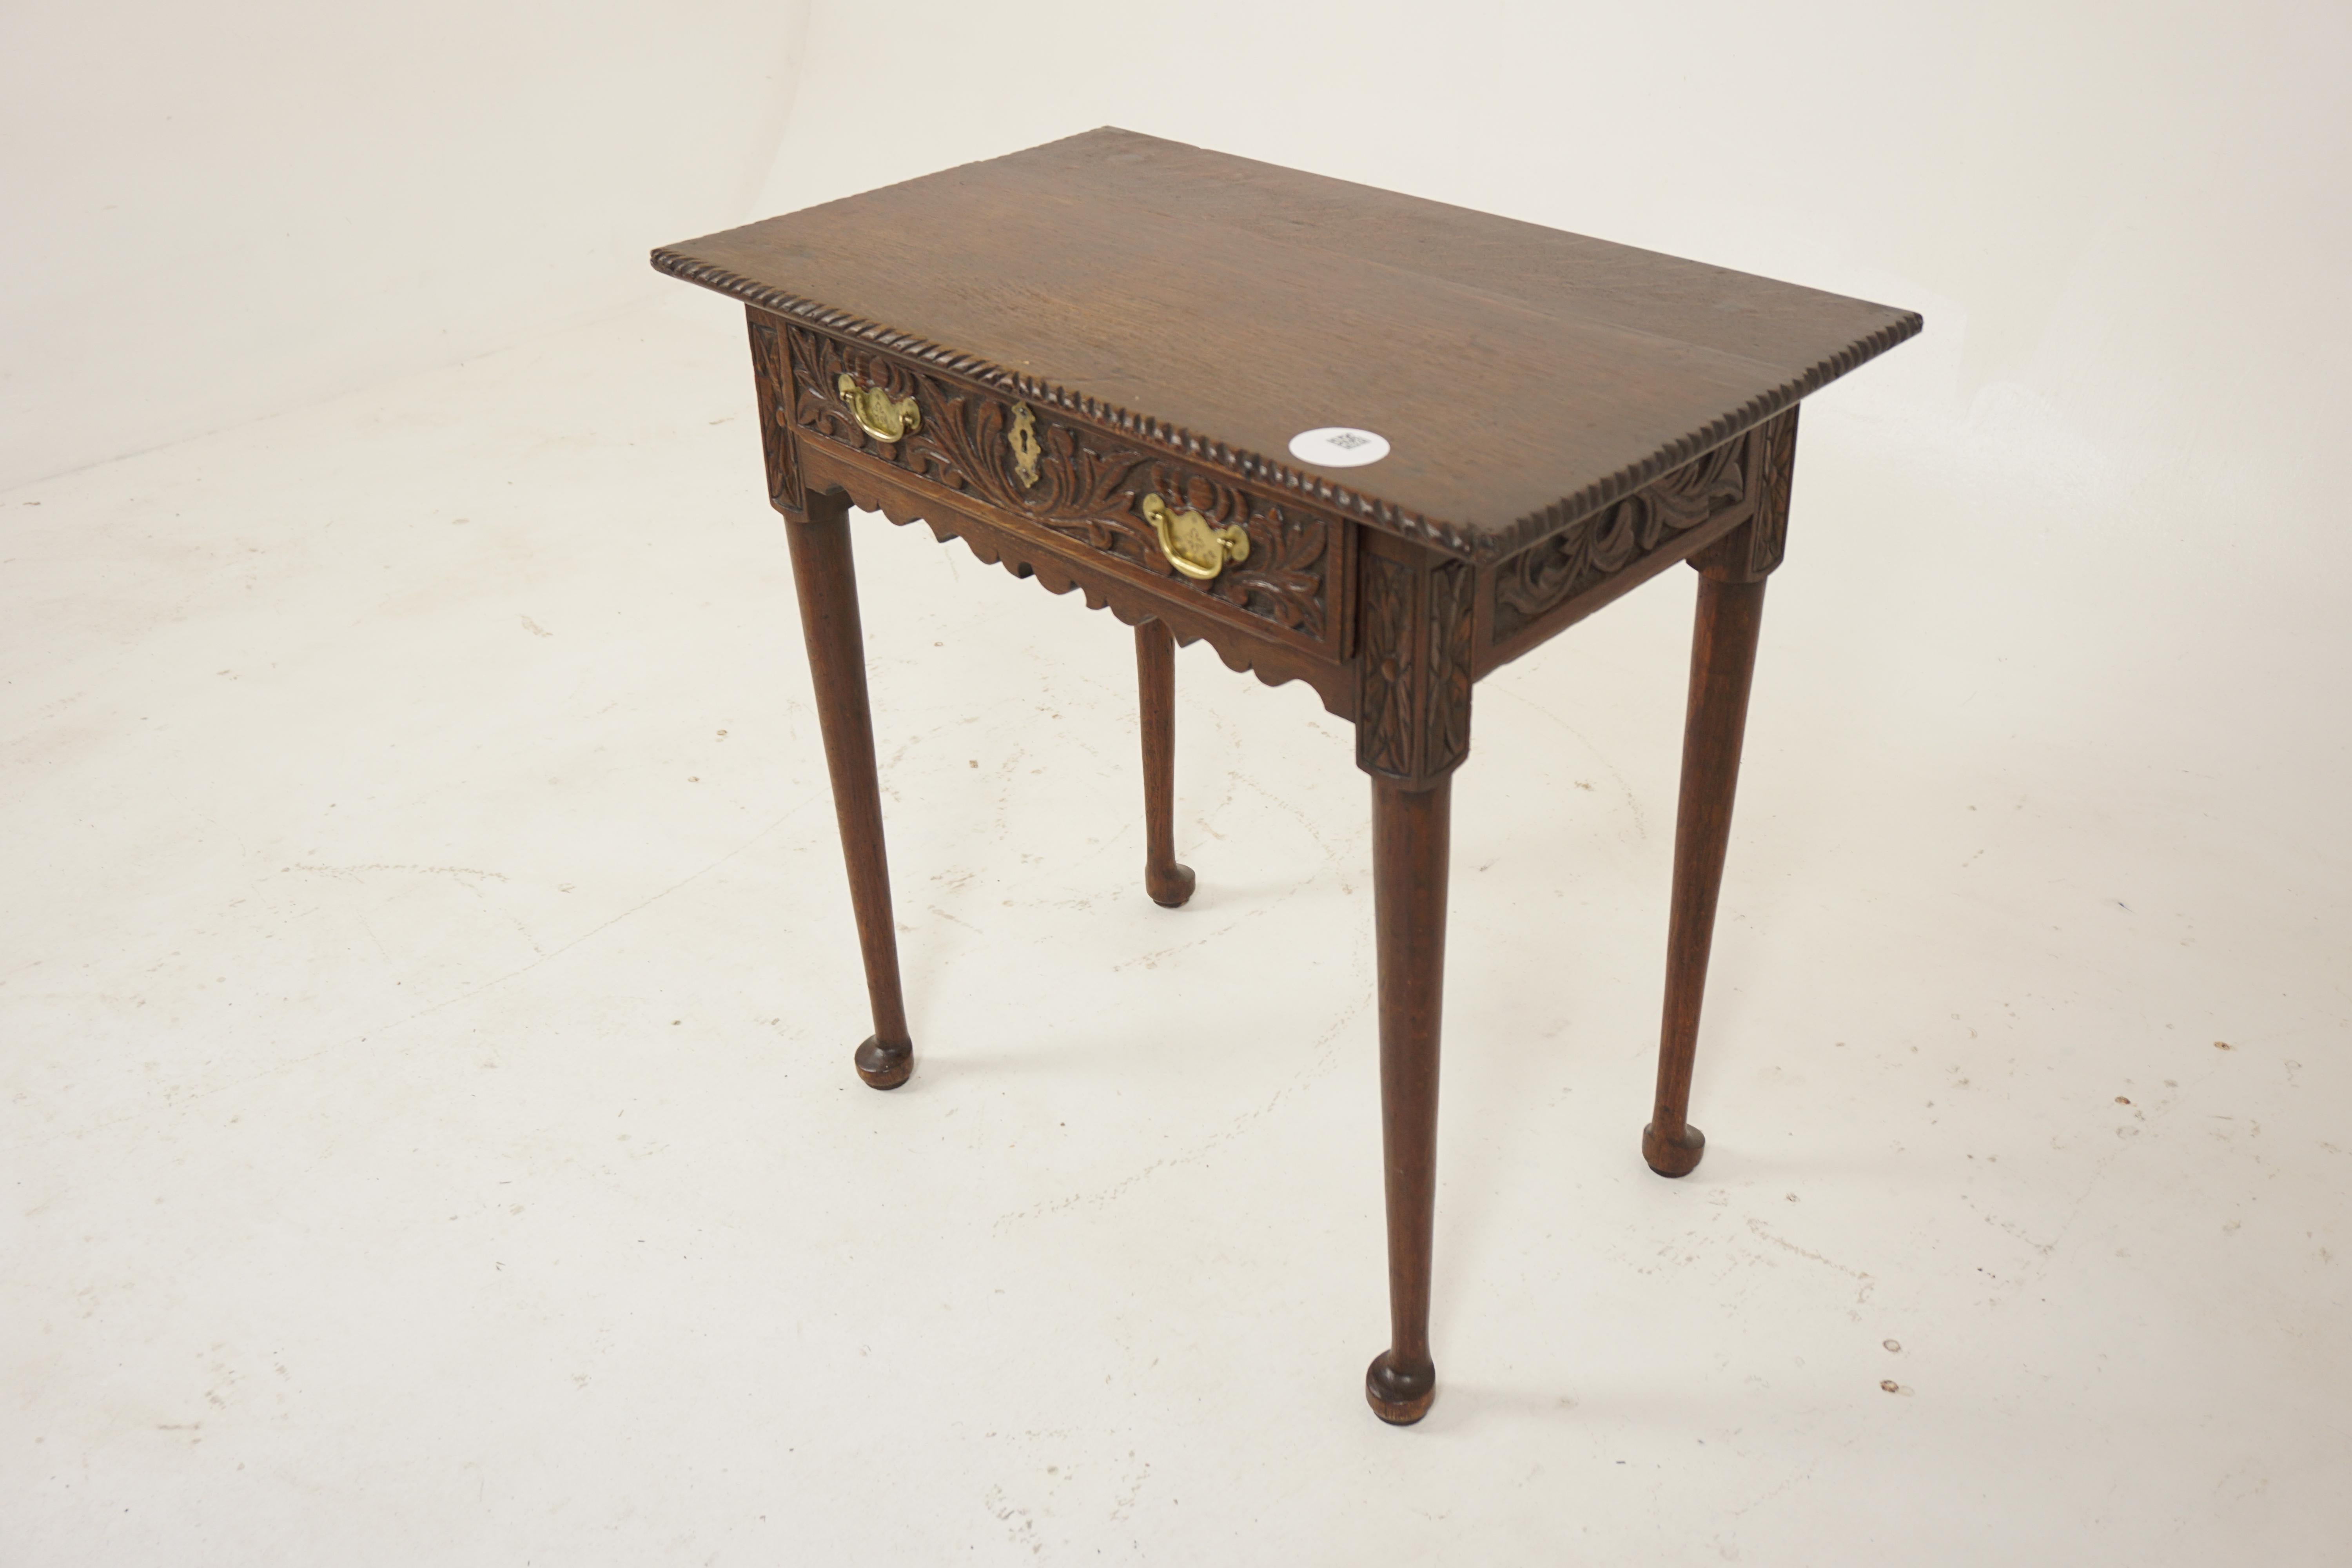 Early 19th Century Oak Hall Table/Drawer, Scotland 1780, H695

Scotland 1780
Solid Oak
Original Finish
Rectangular moulded top with carved frieze
Single carved drawer with brass hardware 
Carved sides
Carved skirt underneath
All standing on tapered